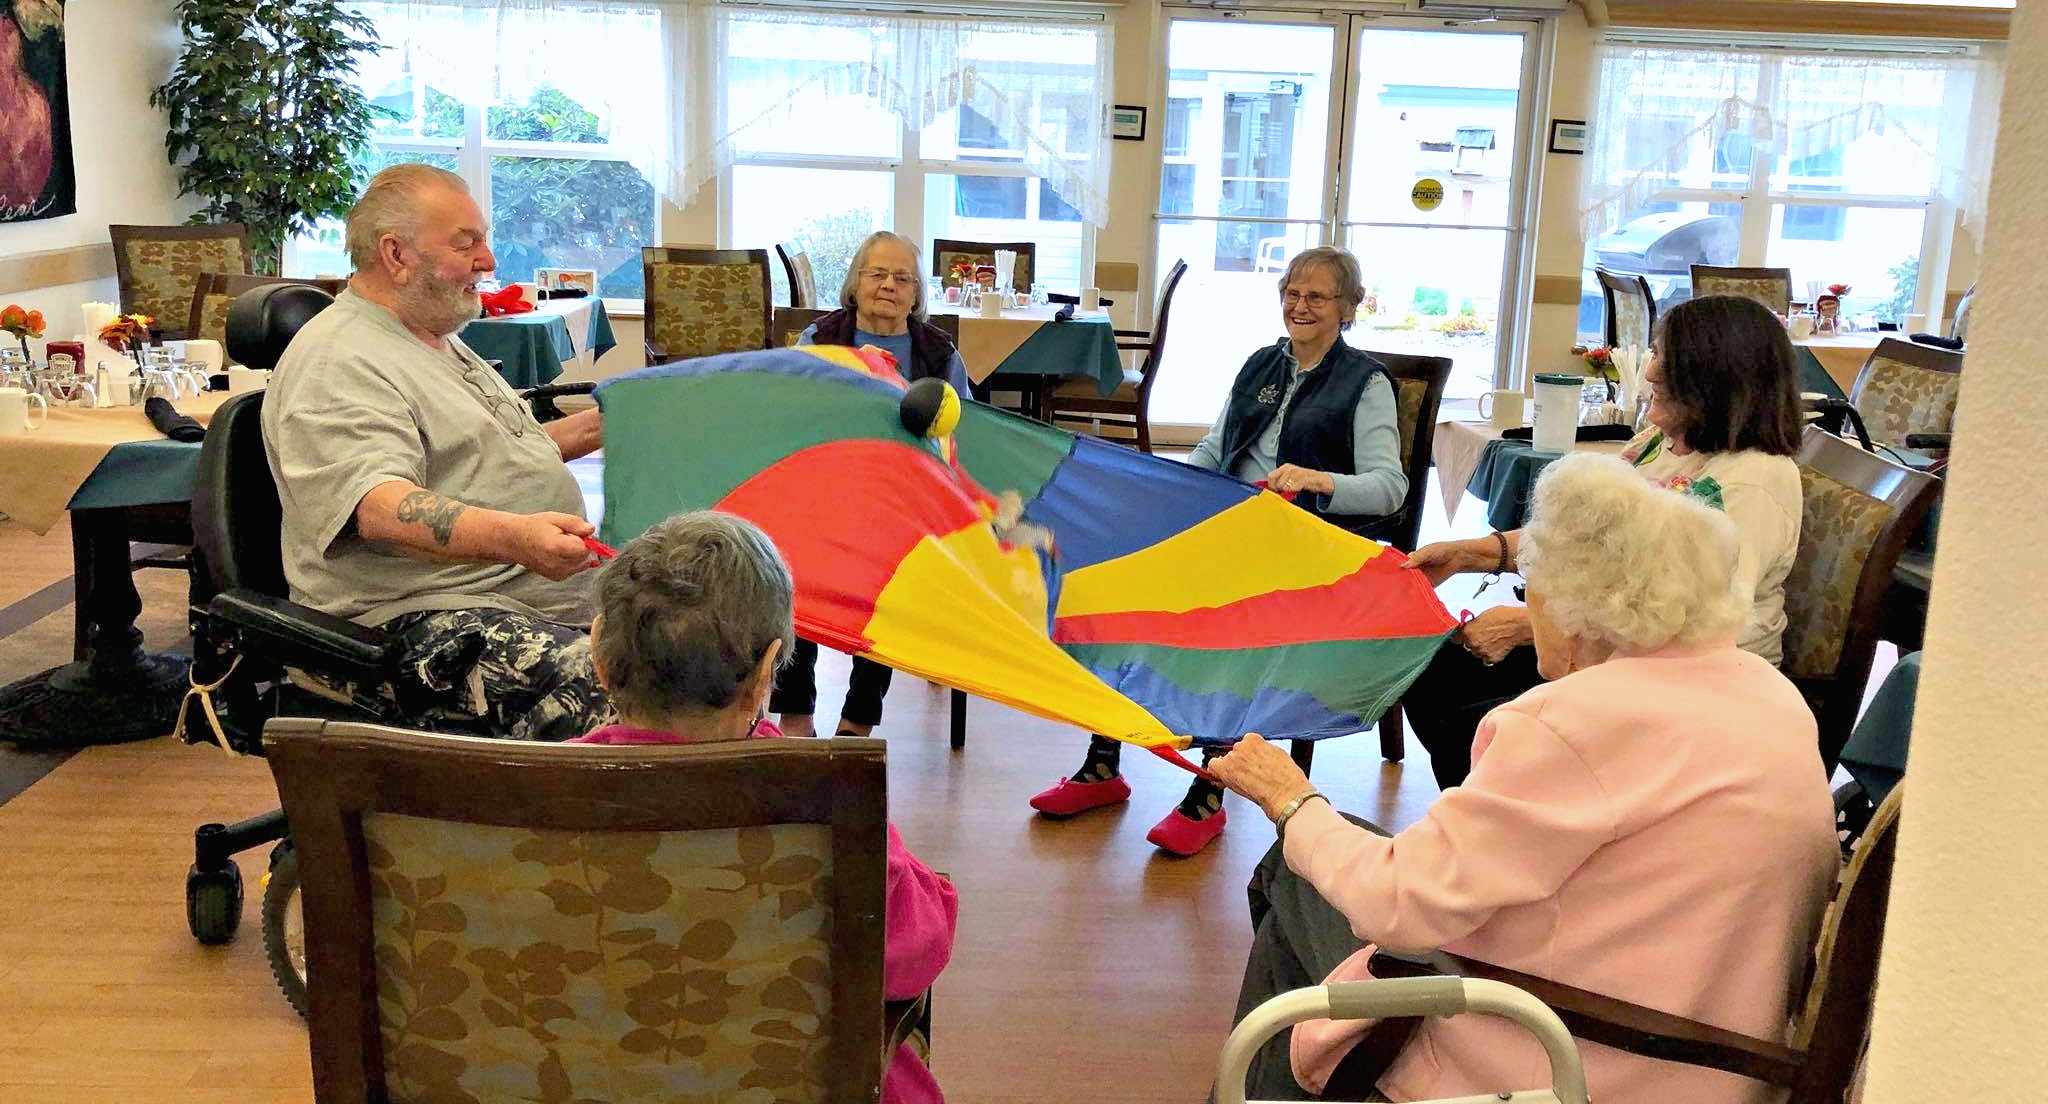 Elderly residents having some fun with a game